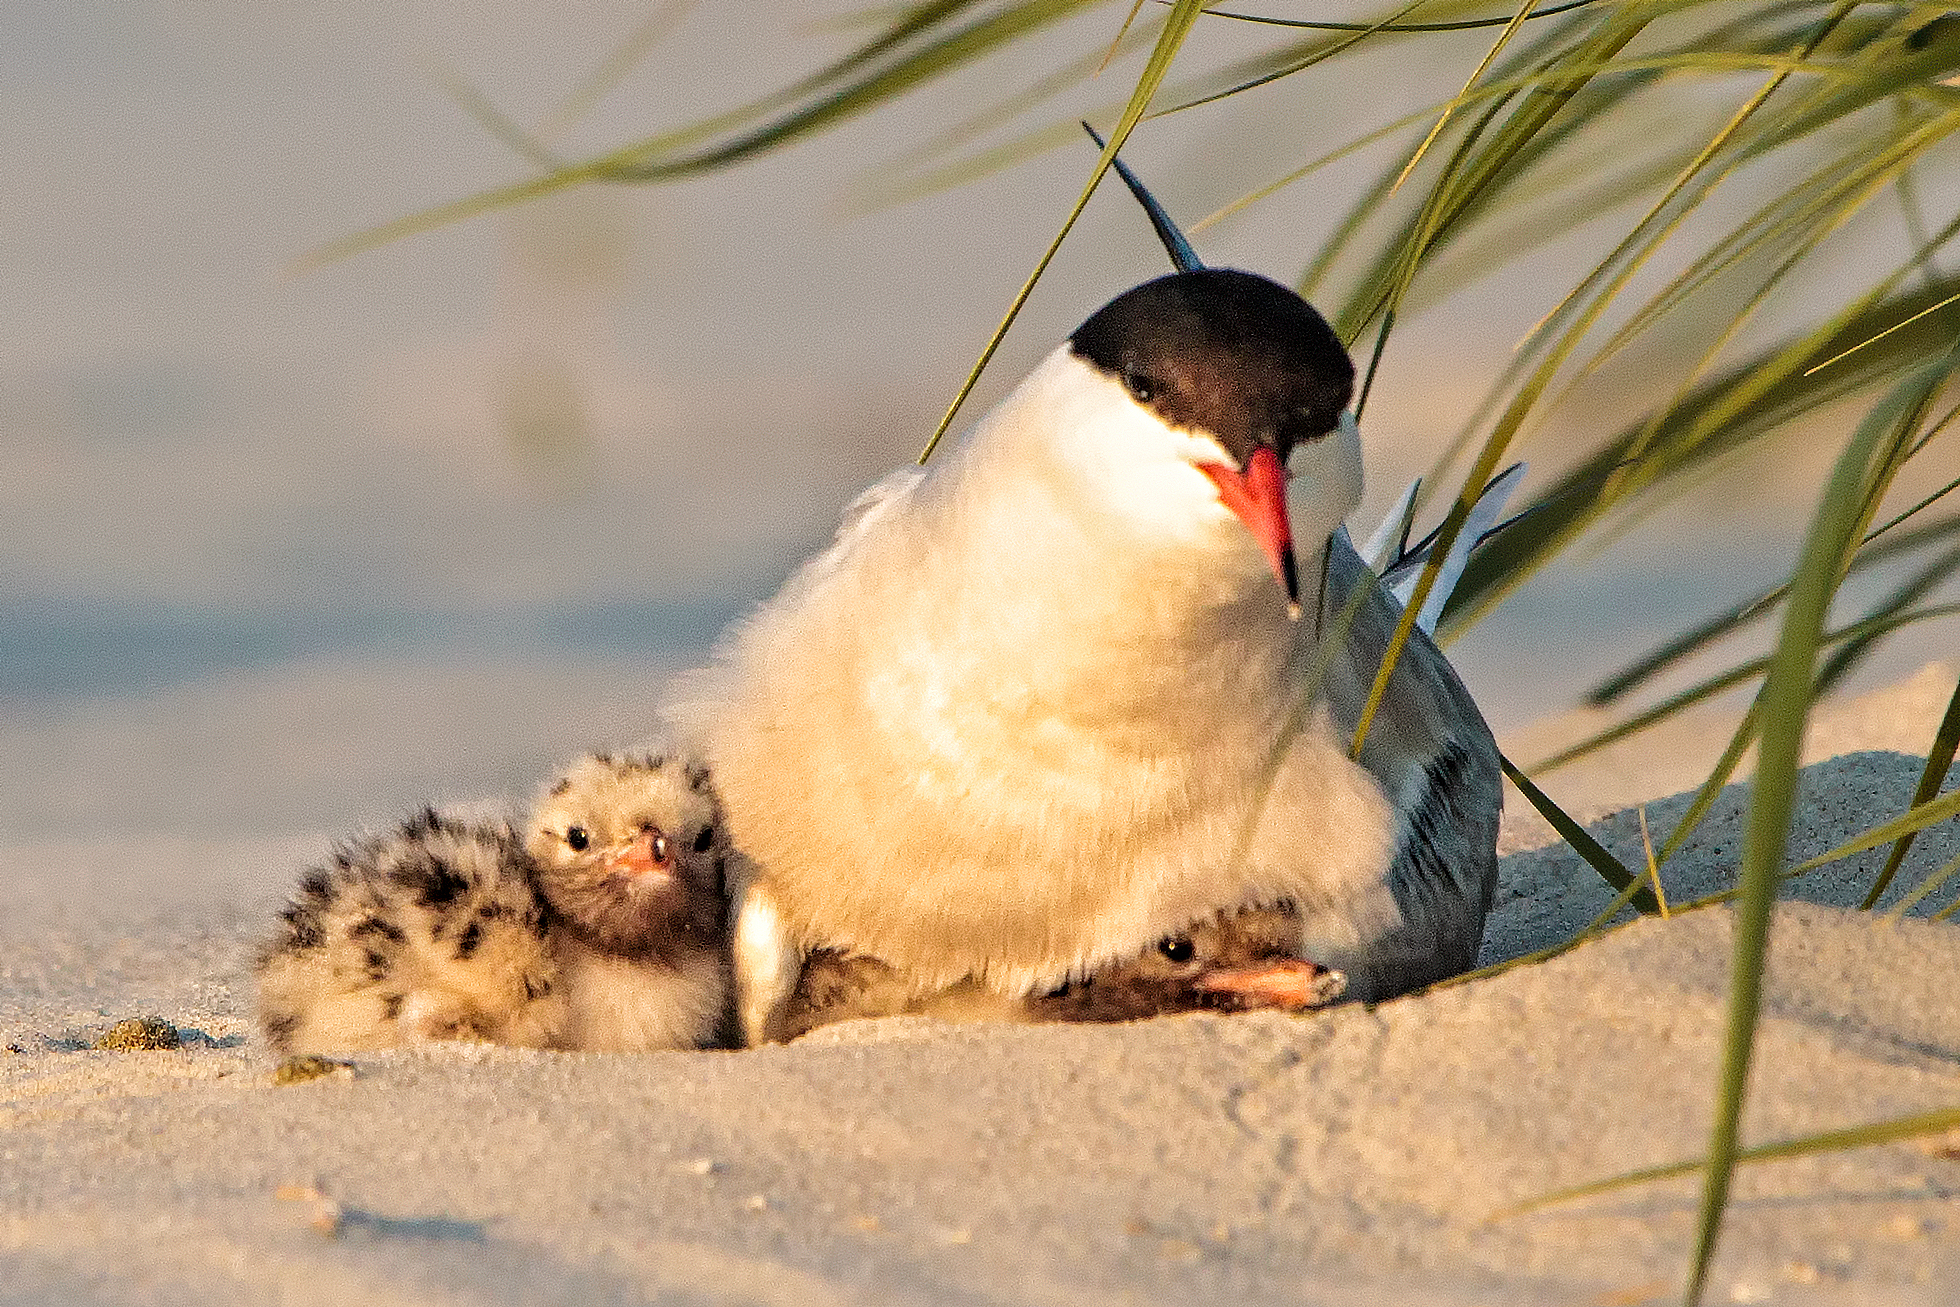 A Common Tern adult and chicks (find the second chick!). Photo: <a href="https://www.pbase.com/btblue" target="_blank">Lloyd Spitalnik</a>